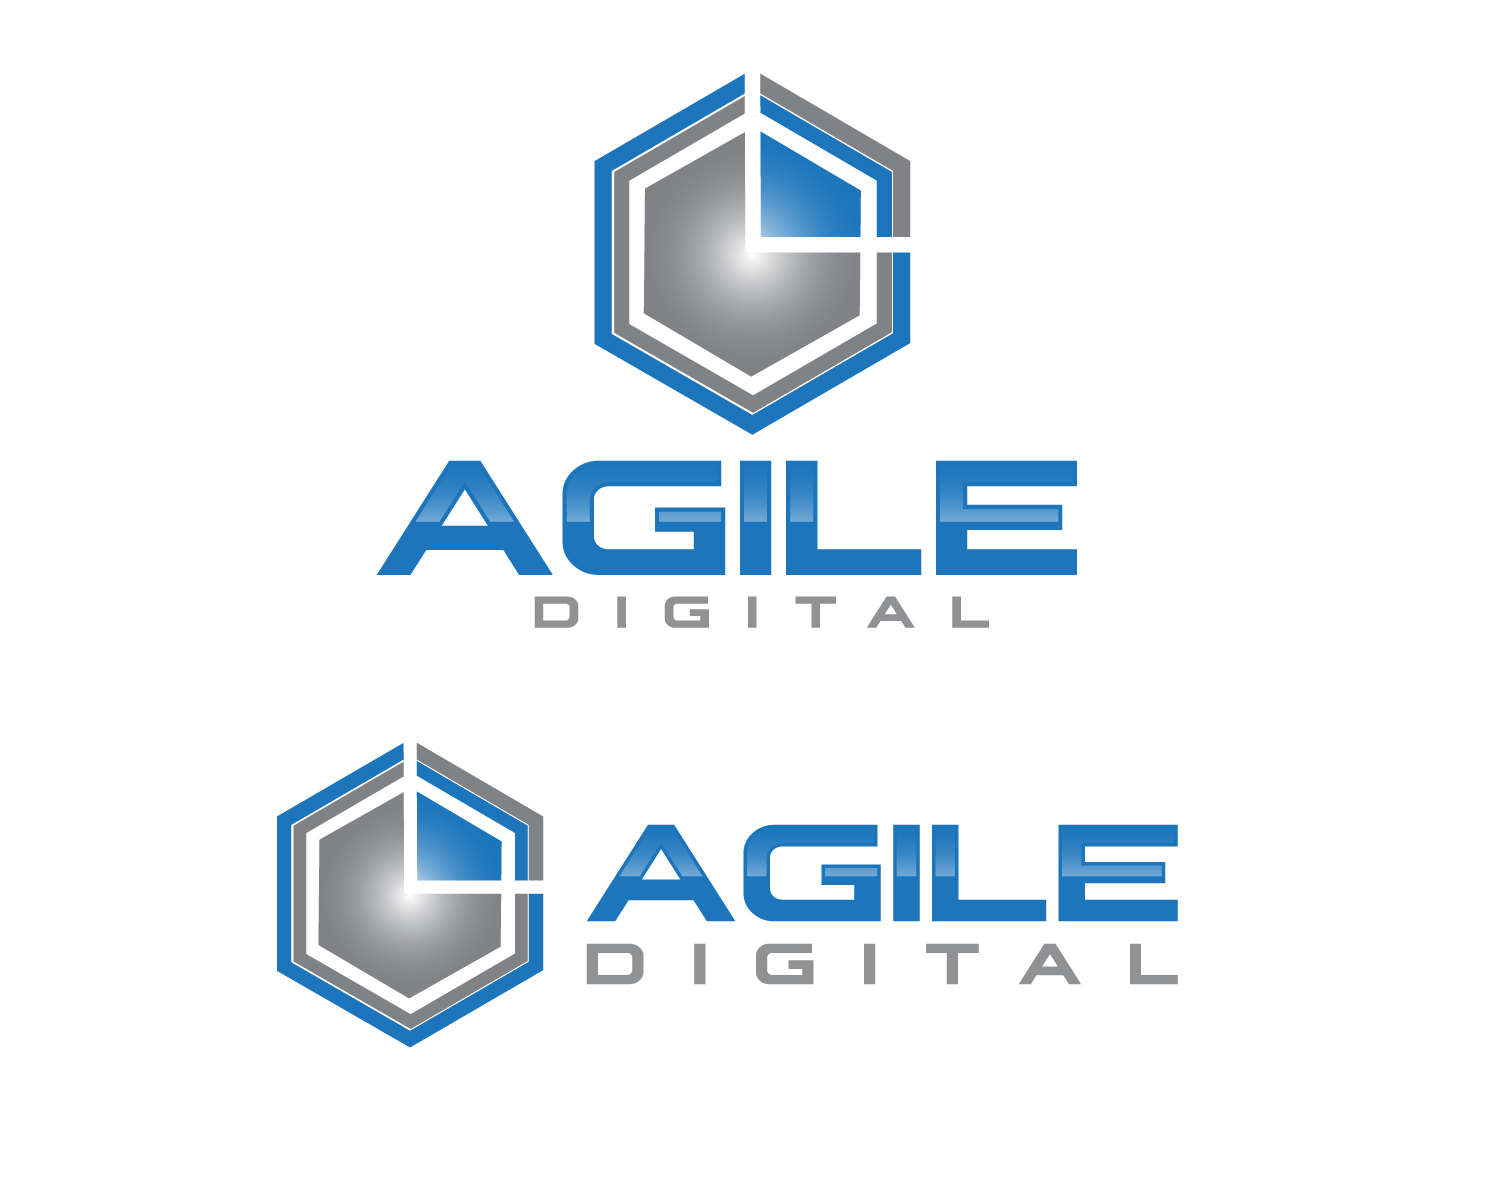 What is Agile Software Development?